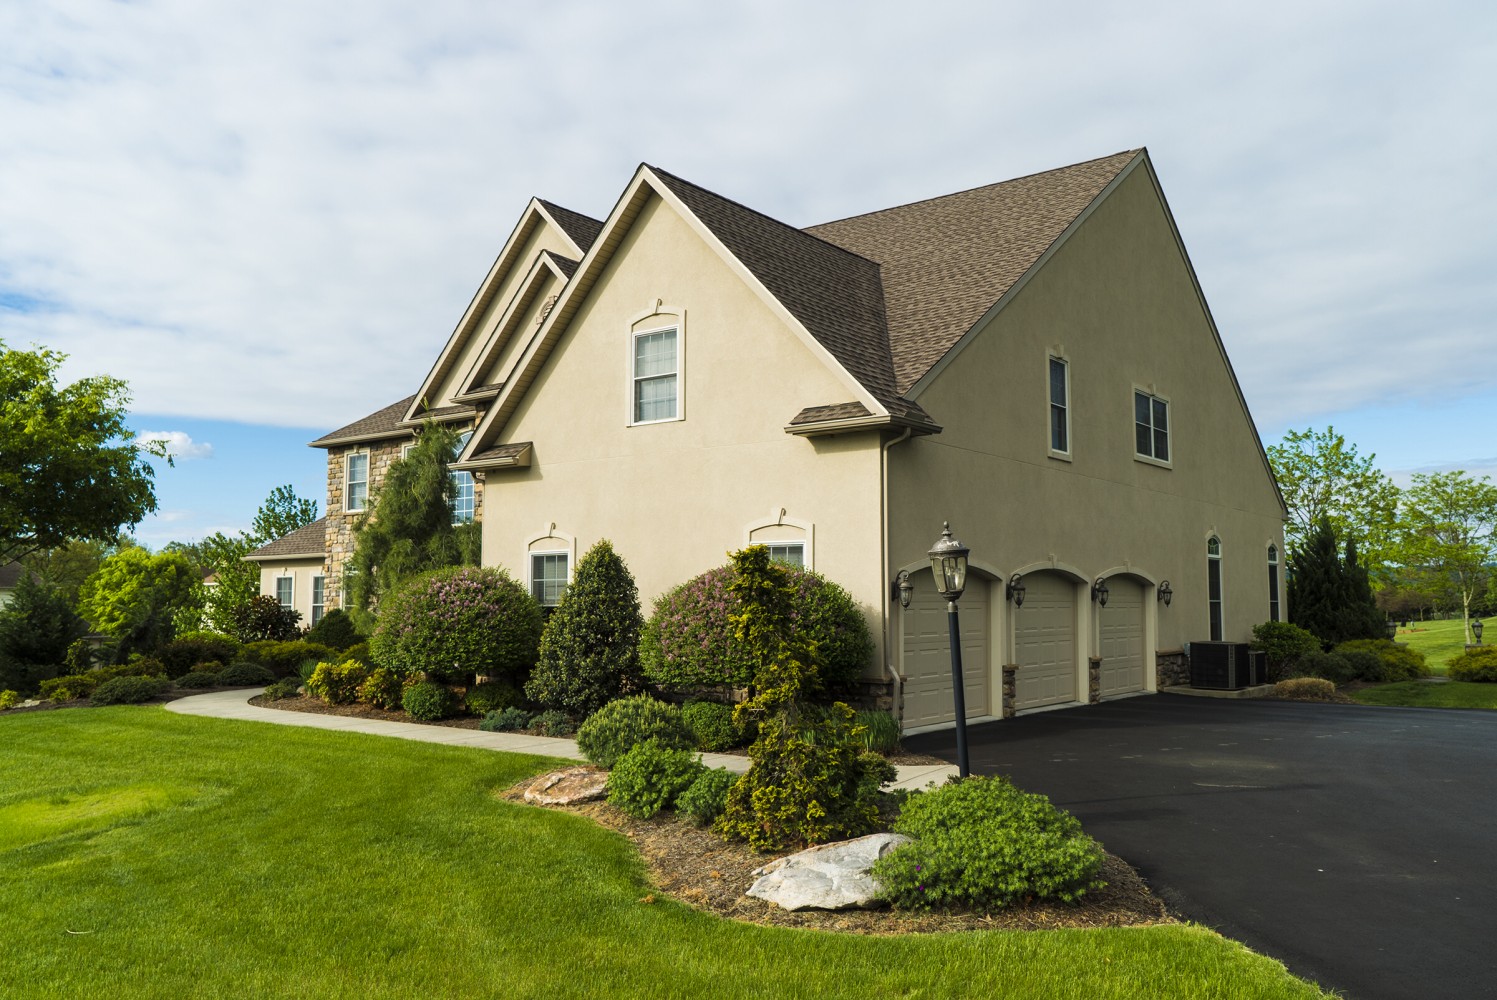 Houses For In Berks County Pa, Green Valley Landscaping Pa